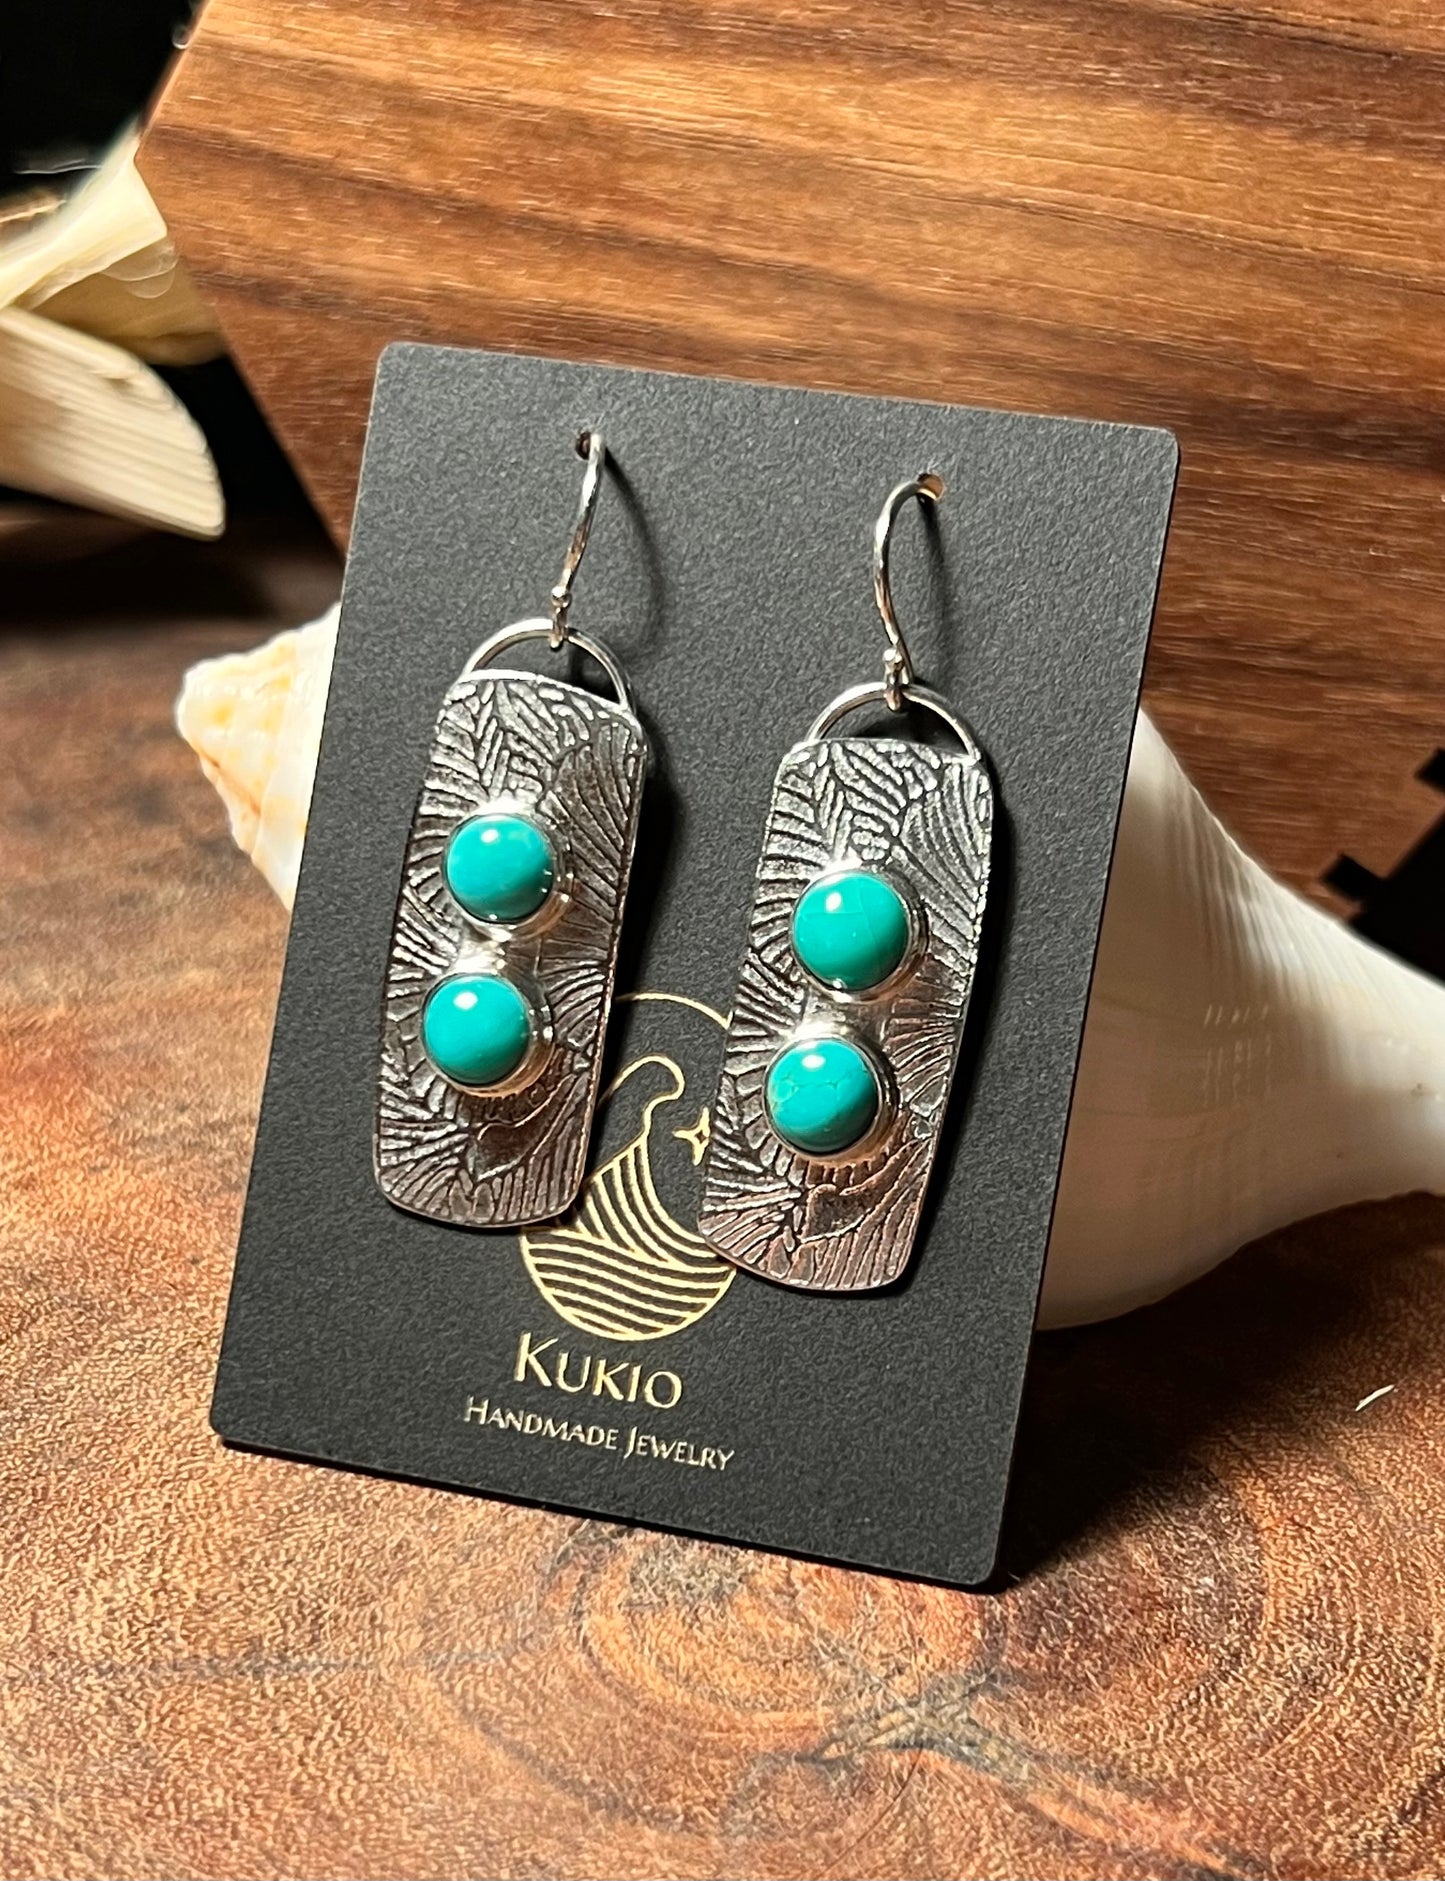 Lone Mountain Turquoise Sterling Silver Patterned Earrings